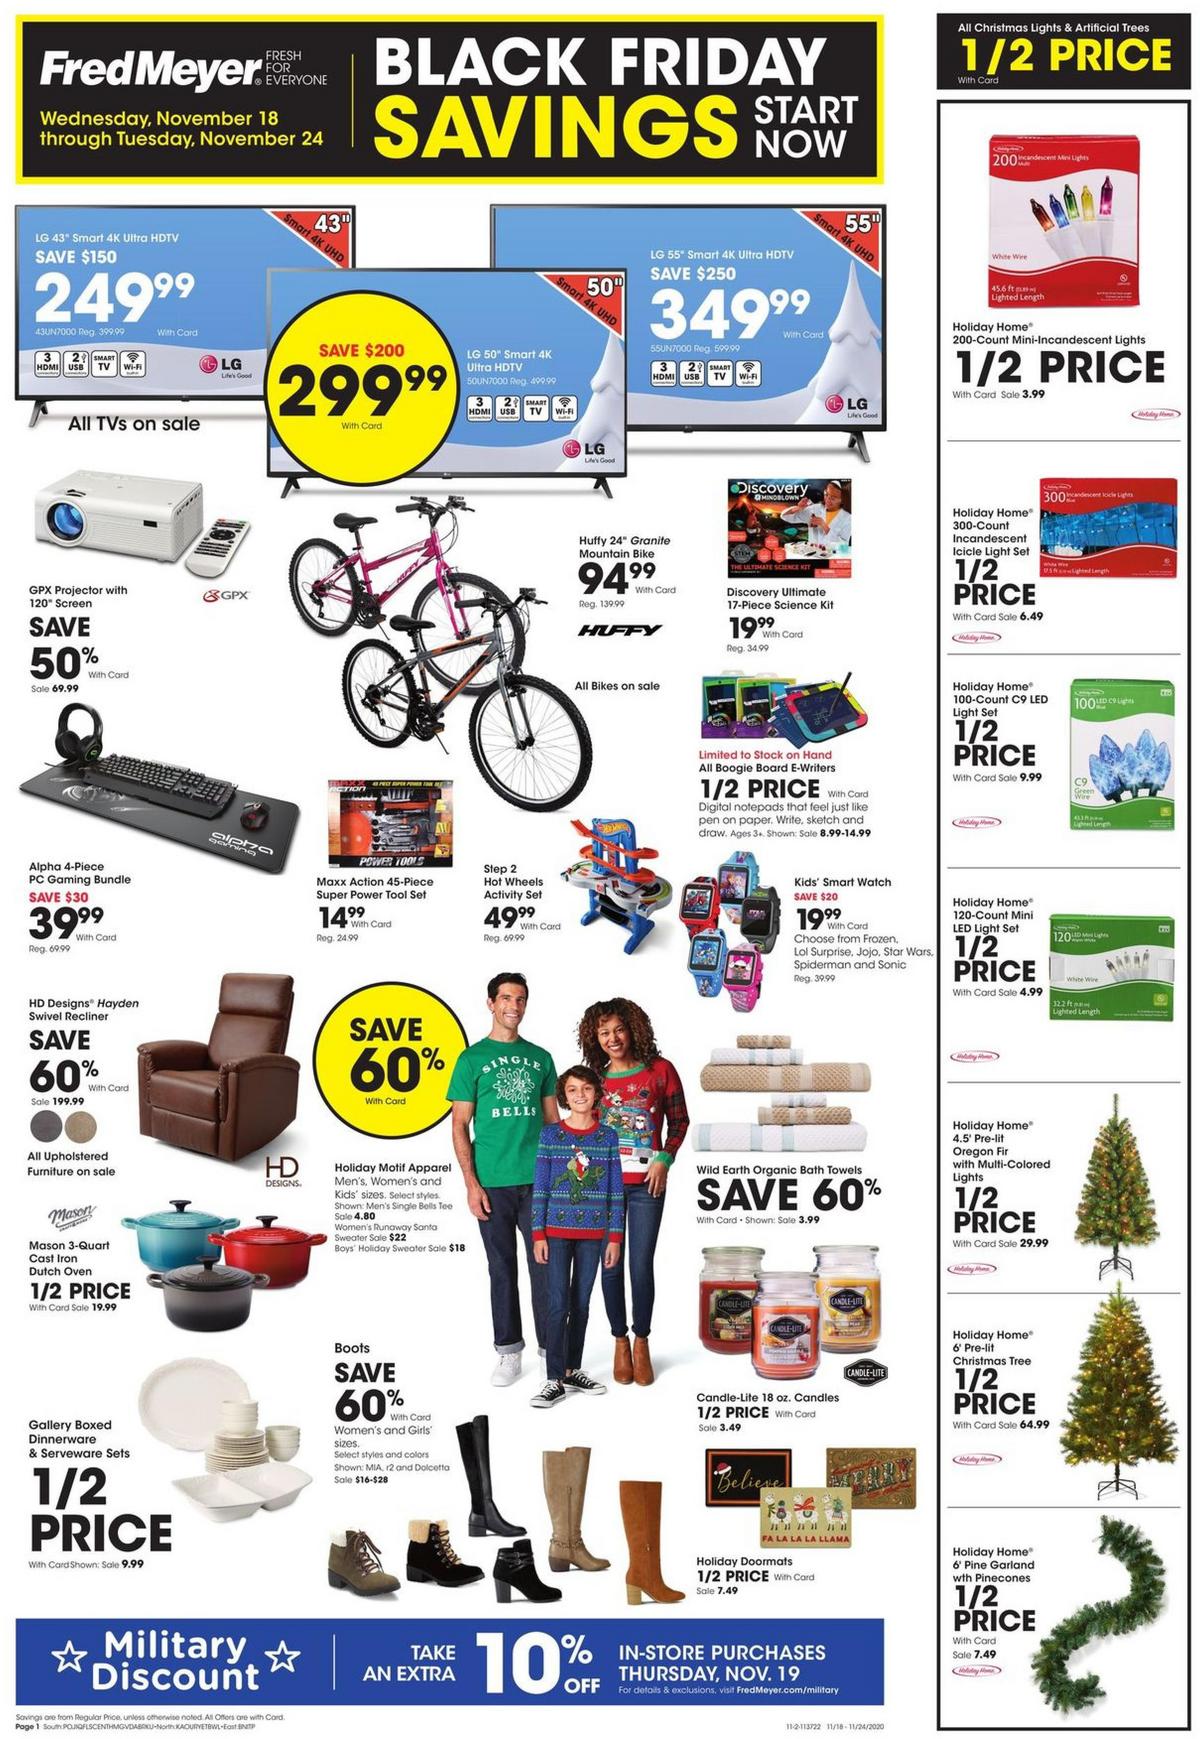 Fred Meyer Black Friday Starts Now Weekly Ad & Specials from November 18